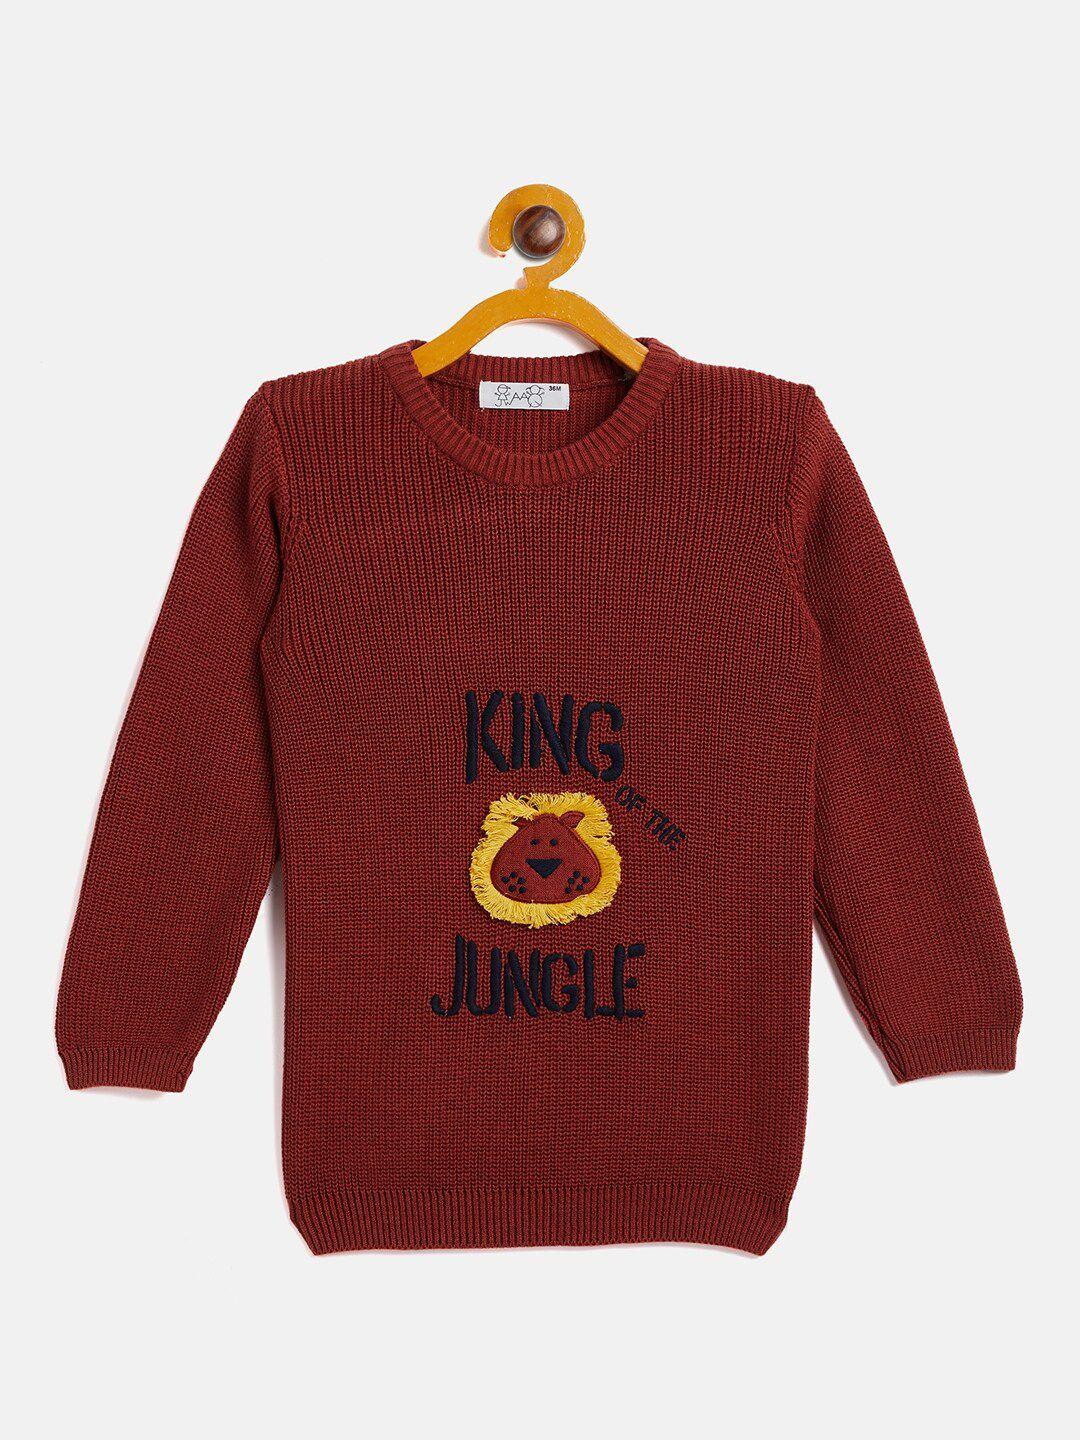 jwaaq unisex kids rust & yellow embroidered printed pullover